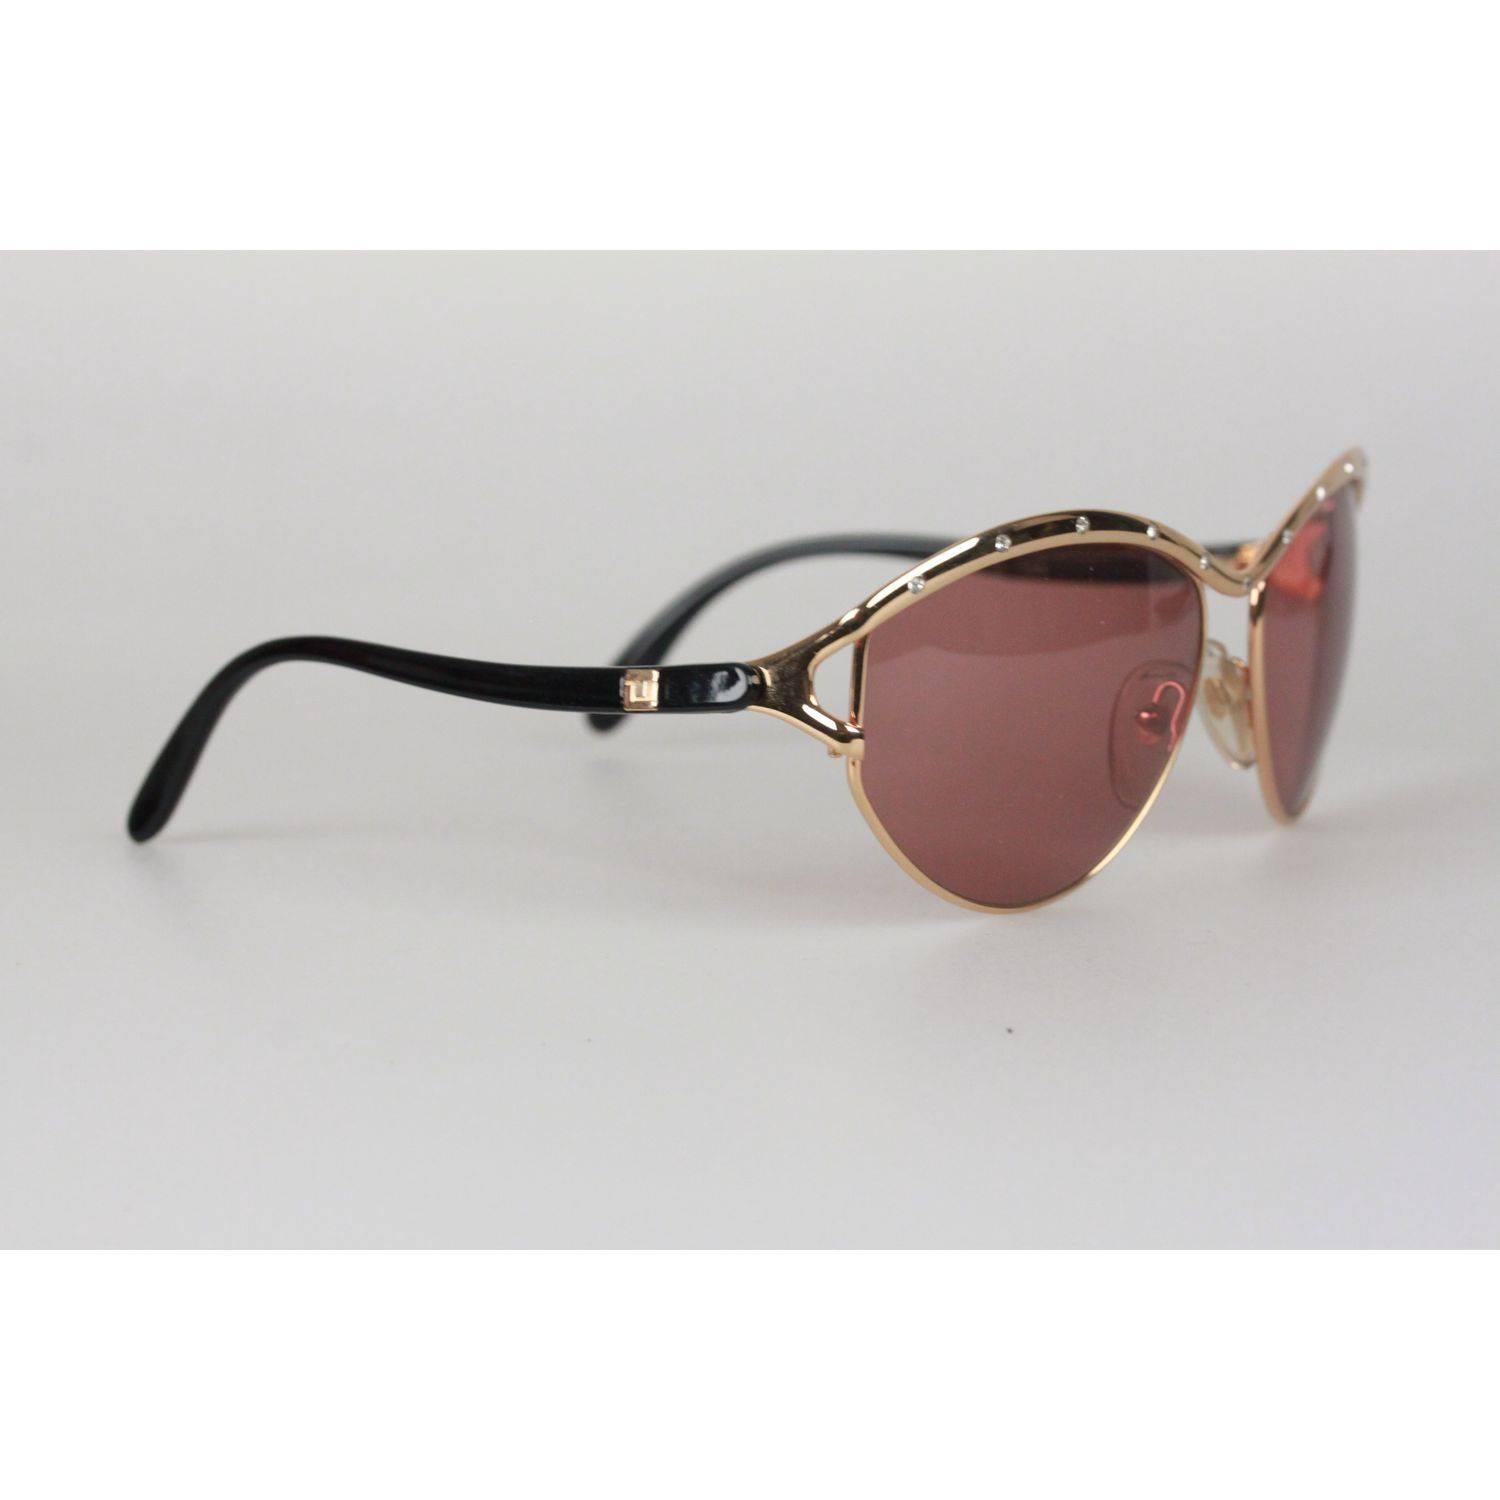 Oversized, gorgeous one-of-a-kind sunglasses by Ted Lapidus, Paris
Gold metal frame with black acetate arms
Rhinestones finish on the top
Brown original lens
Measurements:
- TEMPLE MAX. LENGTH: 110 mm
- TEMPLE TO TEMPLE - MAX WIDTH: 135 mm
- EYE /